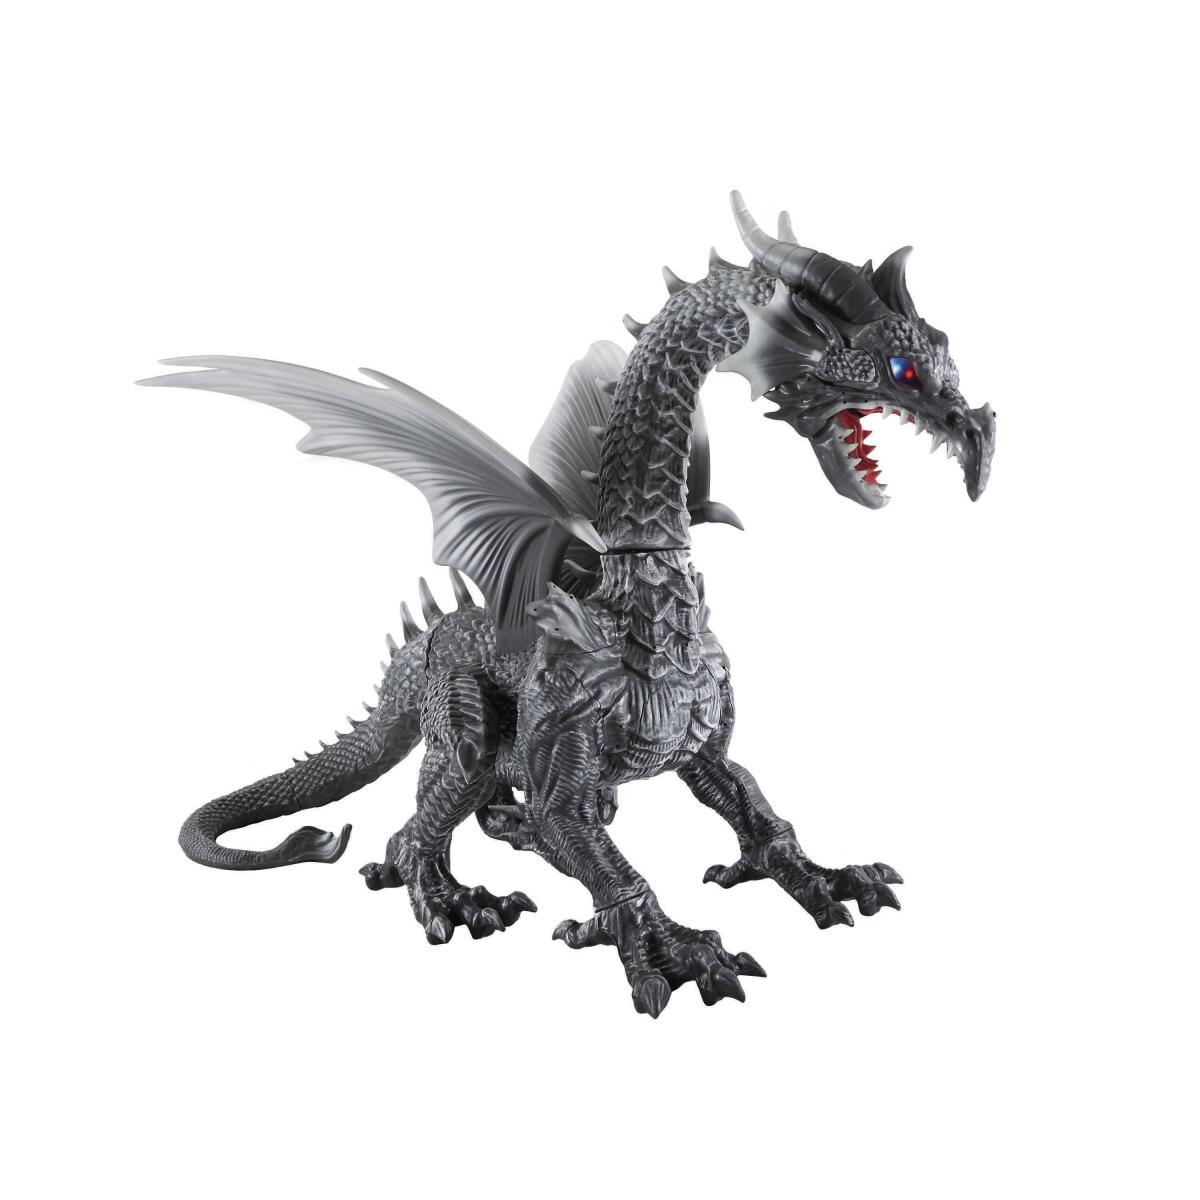 Home Depot's 69-inch-tall animated dragon was available only online, for $399, and sold out in July.